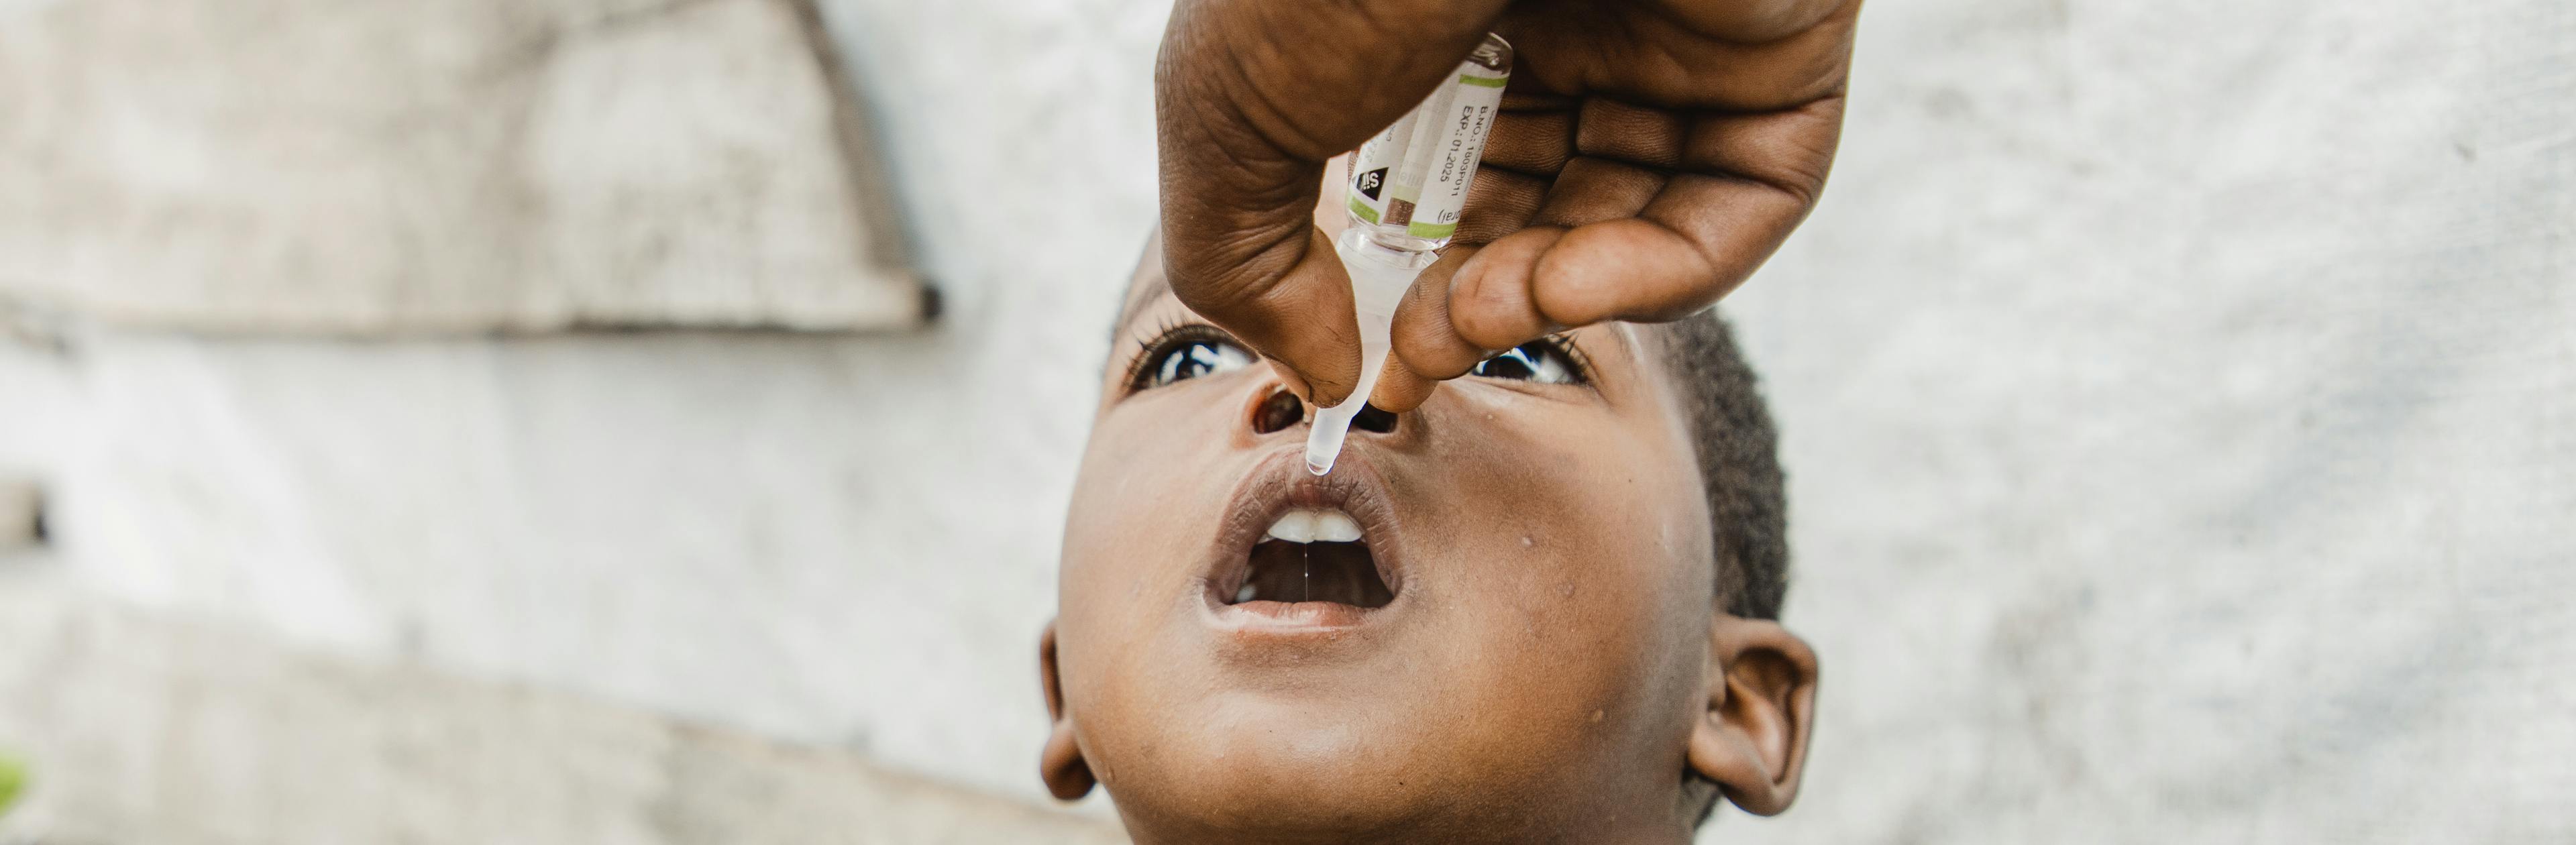 A displaced child is vaccinated against polio at the Bulengo site for displaced persons in Goma, North Kivu, DR Congo, August 11, 2023.  UNICEF is supporting a large-scale vaccination campaign to protect more than 23 million children across the country.